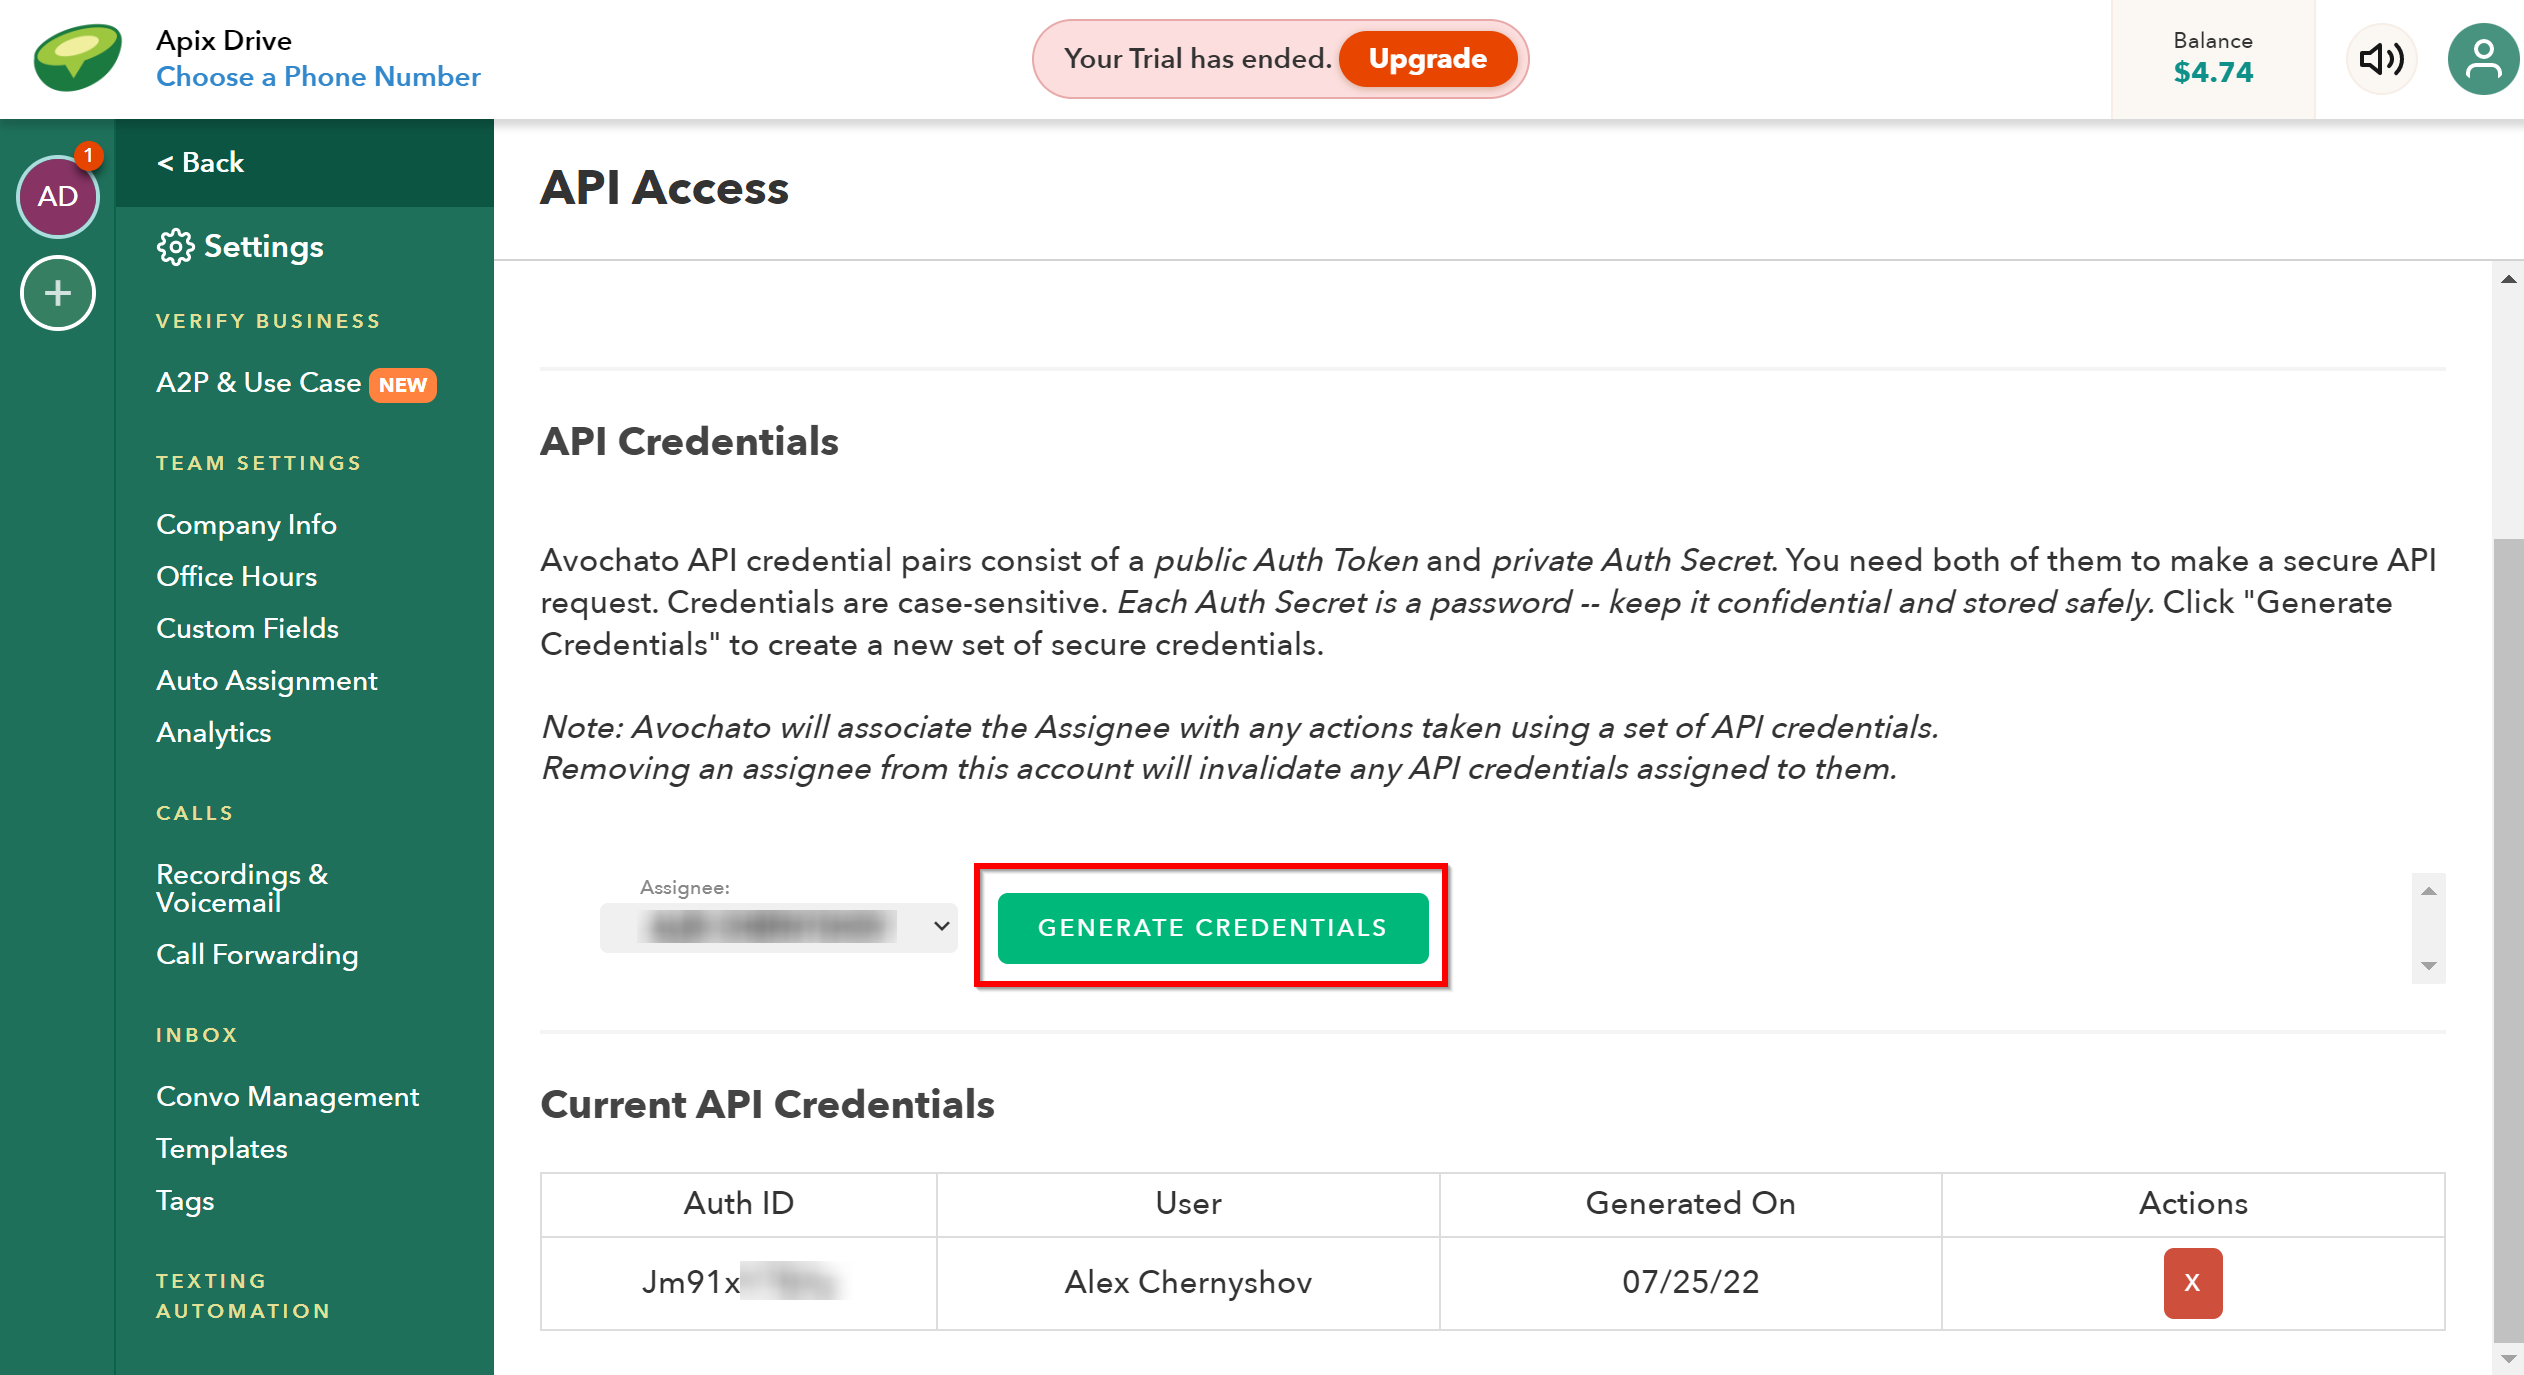 How to Connect Avochato as Data Destination | Account connection